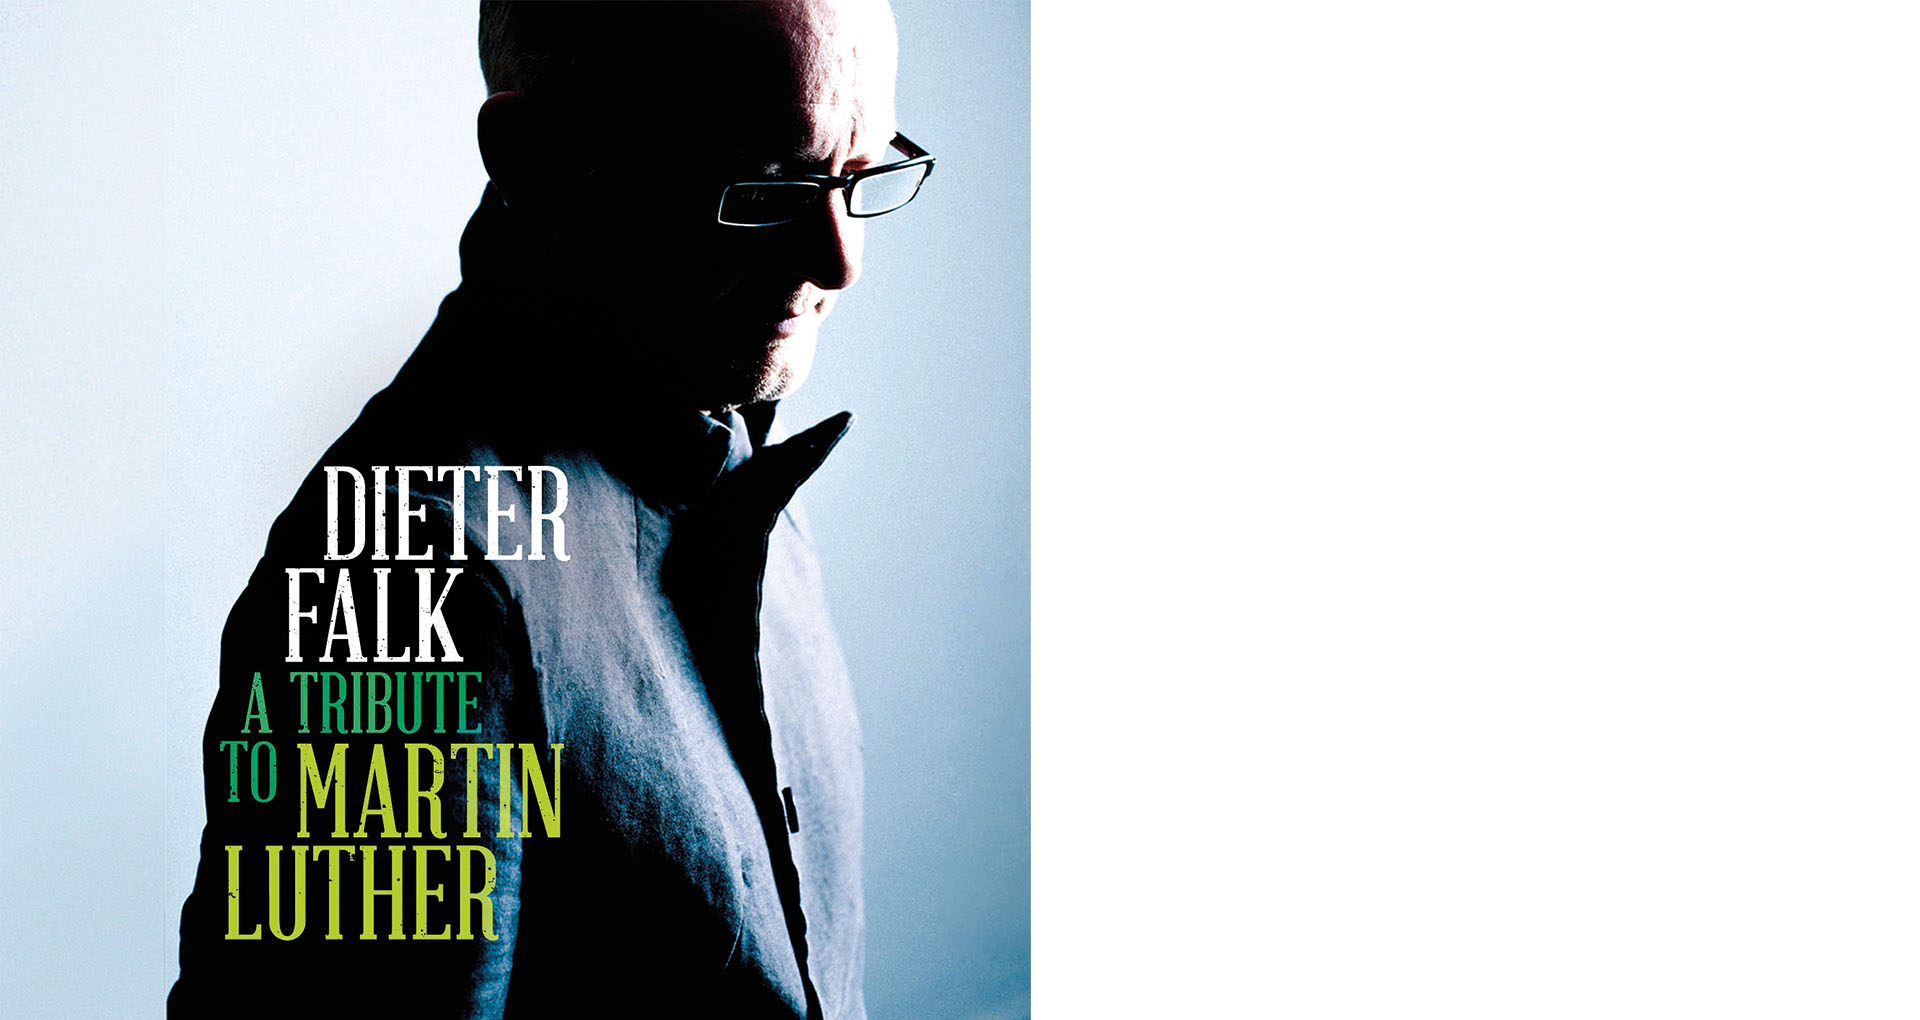 Dieter Falk, „A Tribute to Martin Luther“, Gerth Medien, 17,99 Euro, EAN 0028947962892